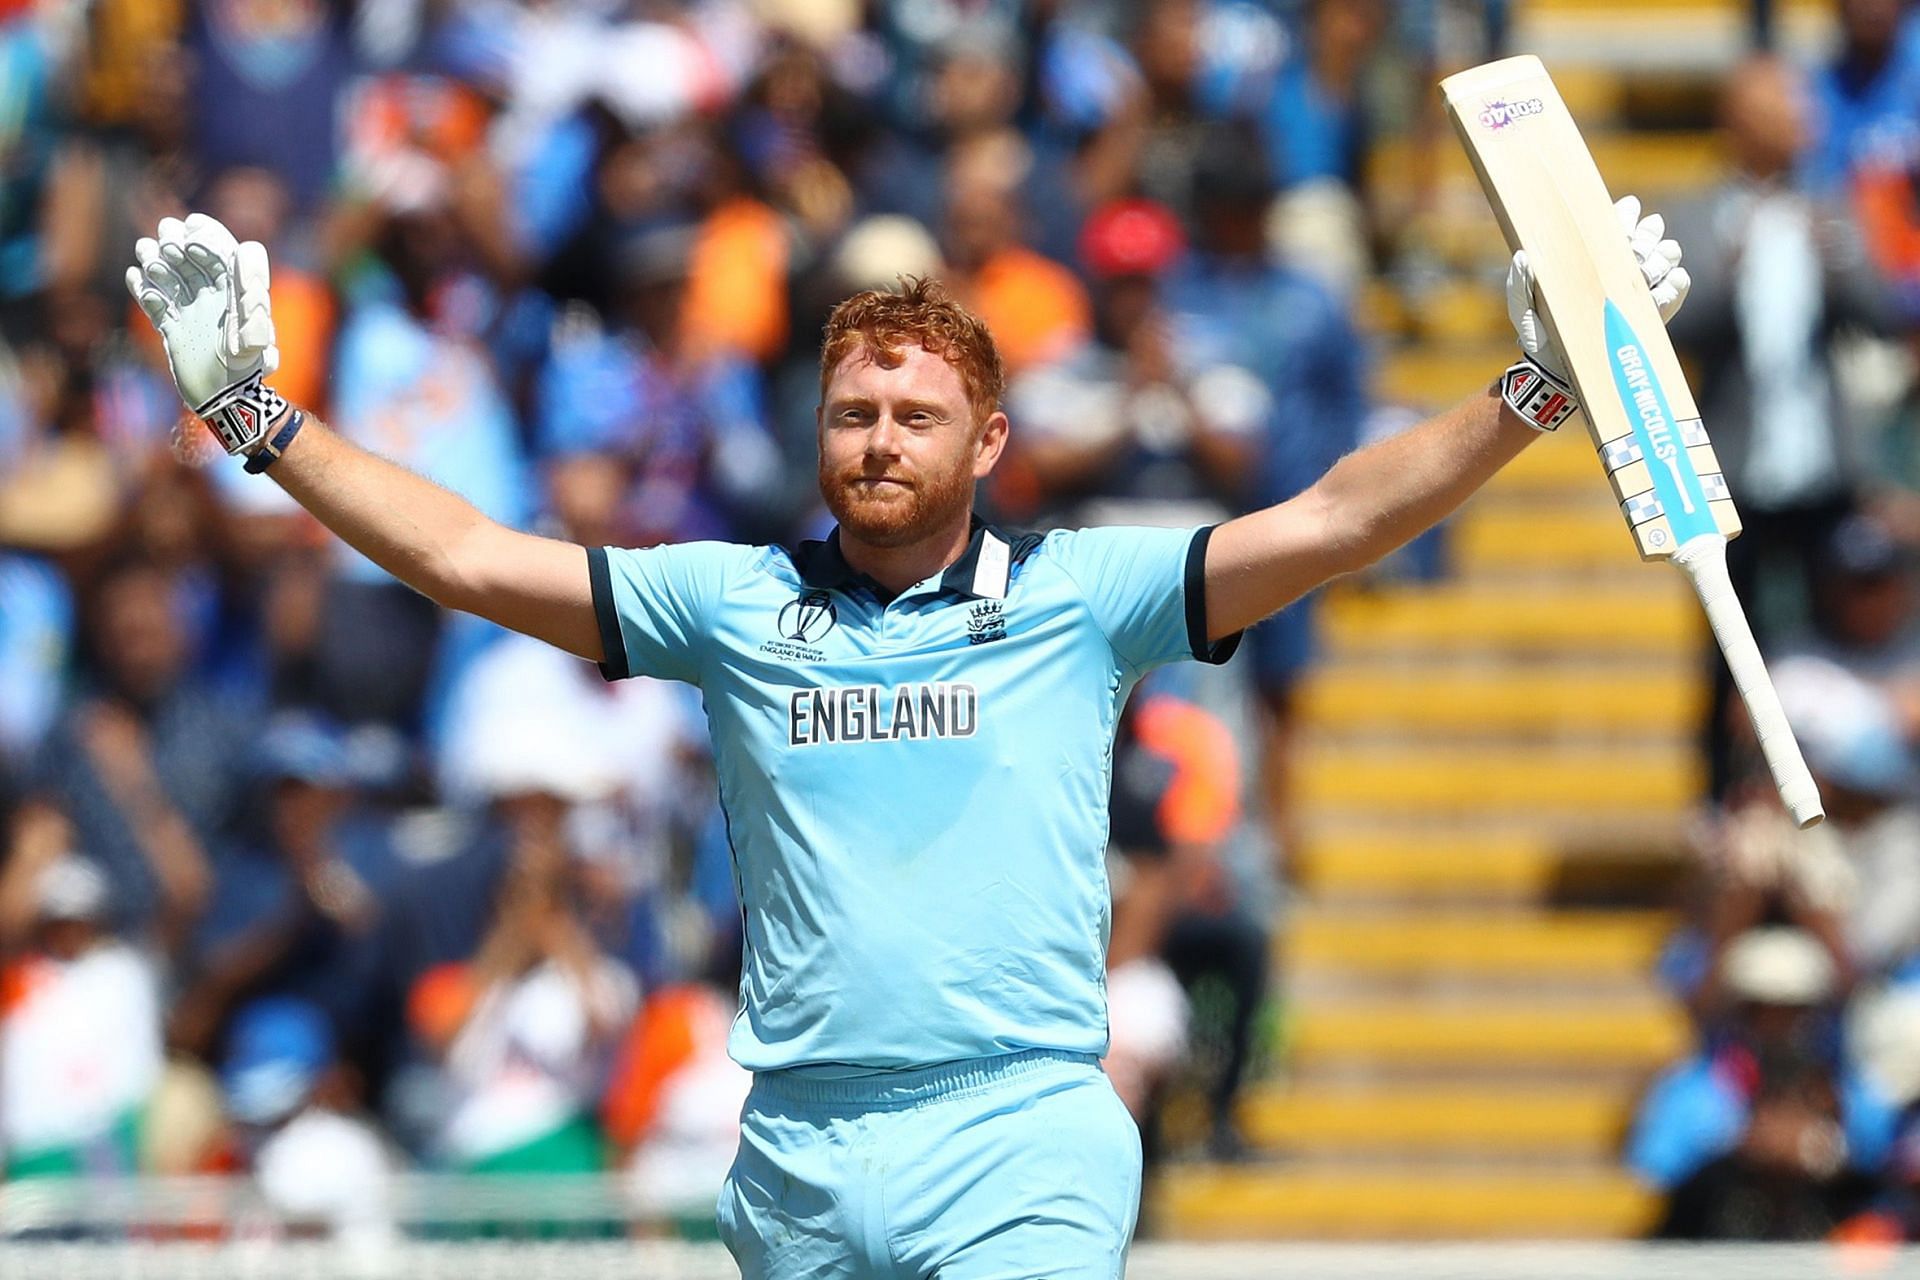 Jonny Bairstow slammed 532 runs at the ICC Cricket World Cup 2019 [Getty Images]